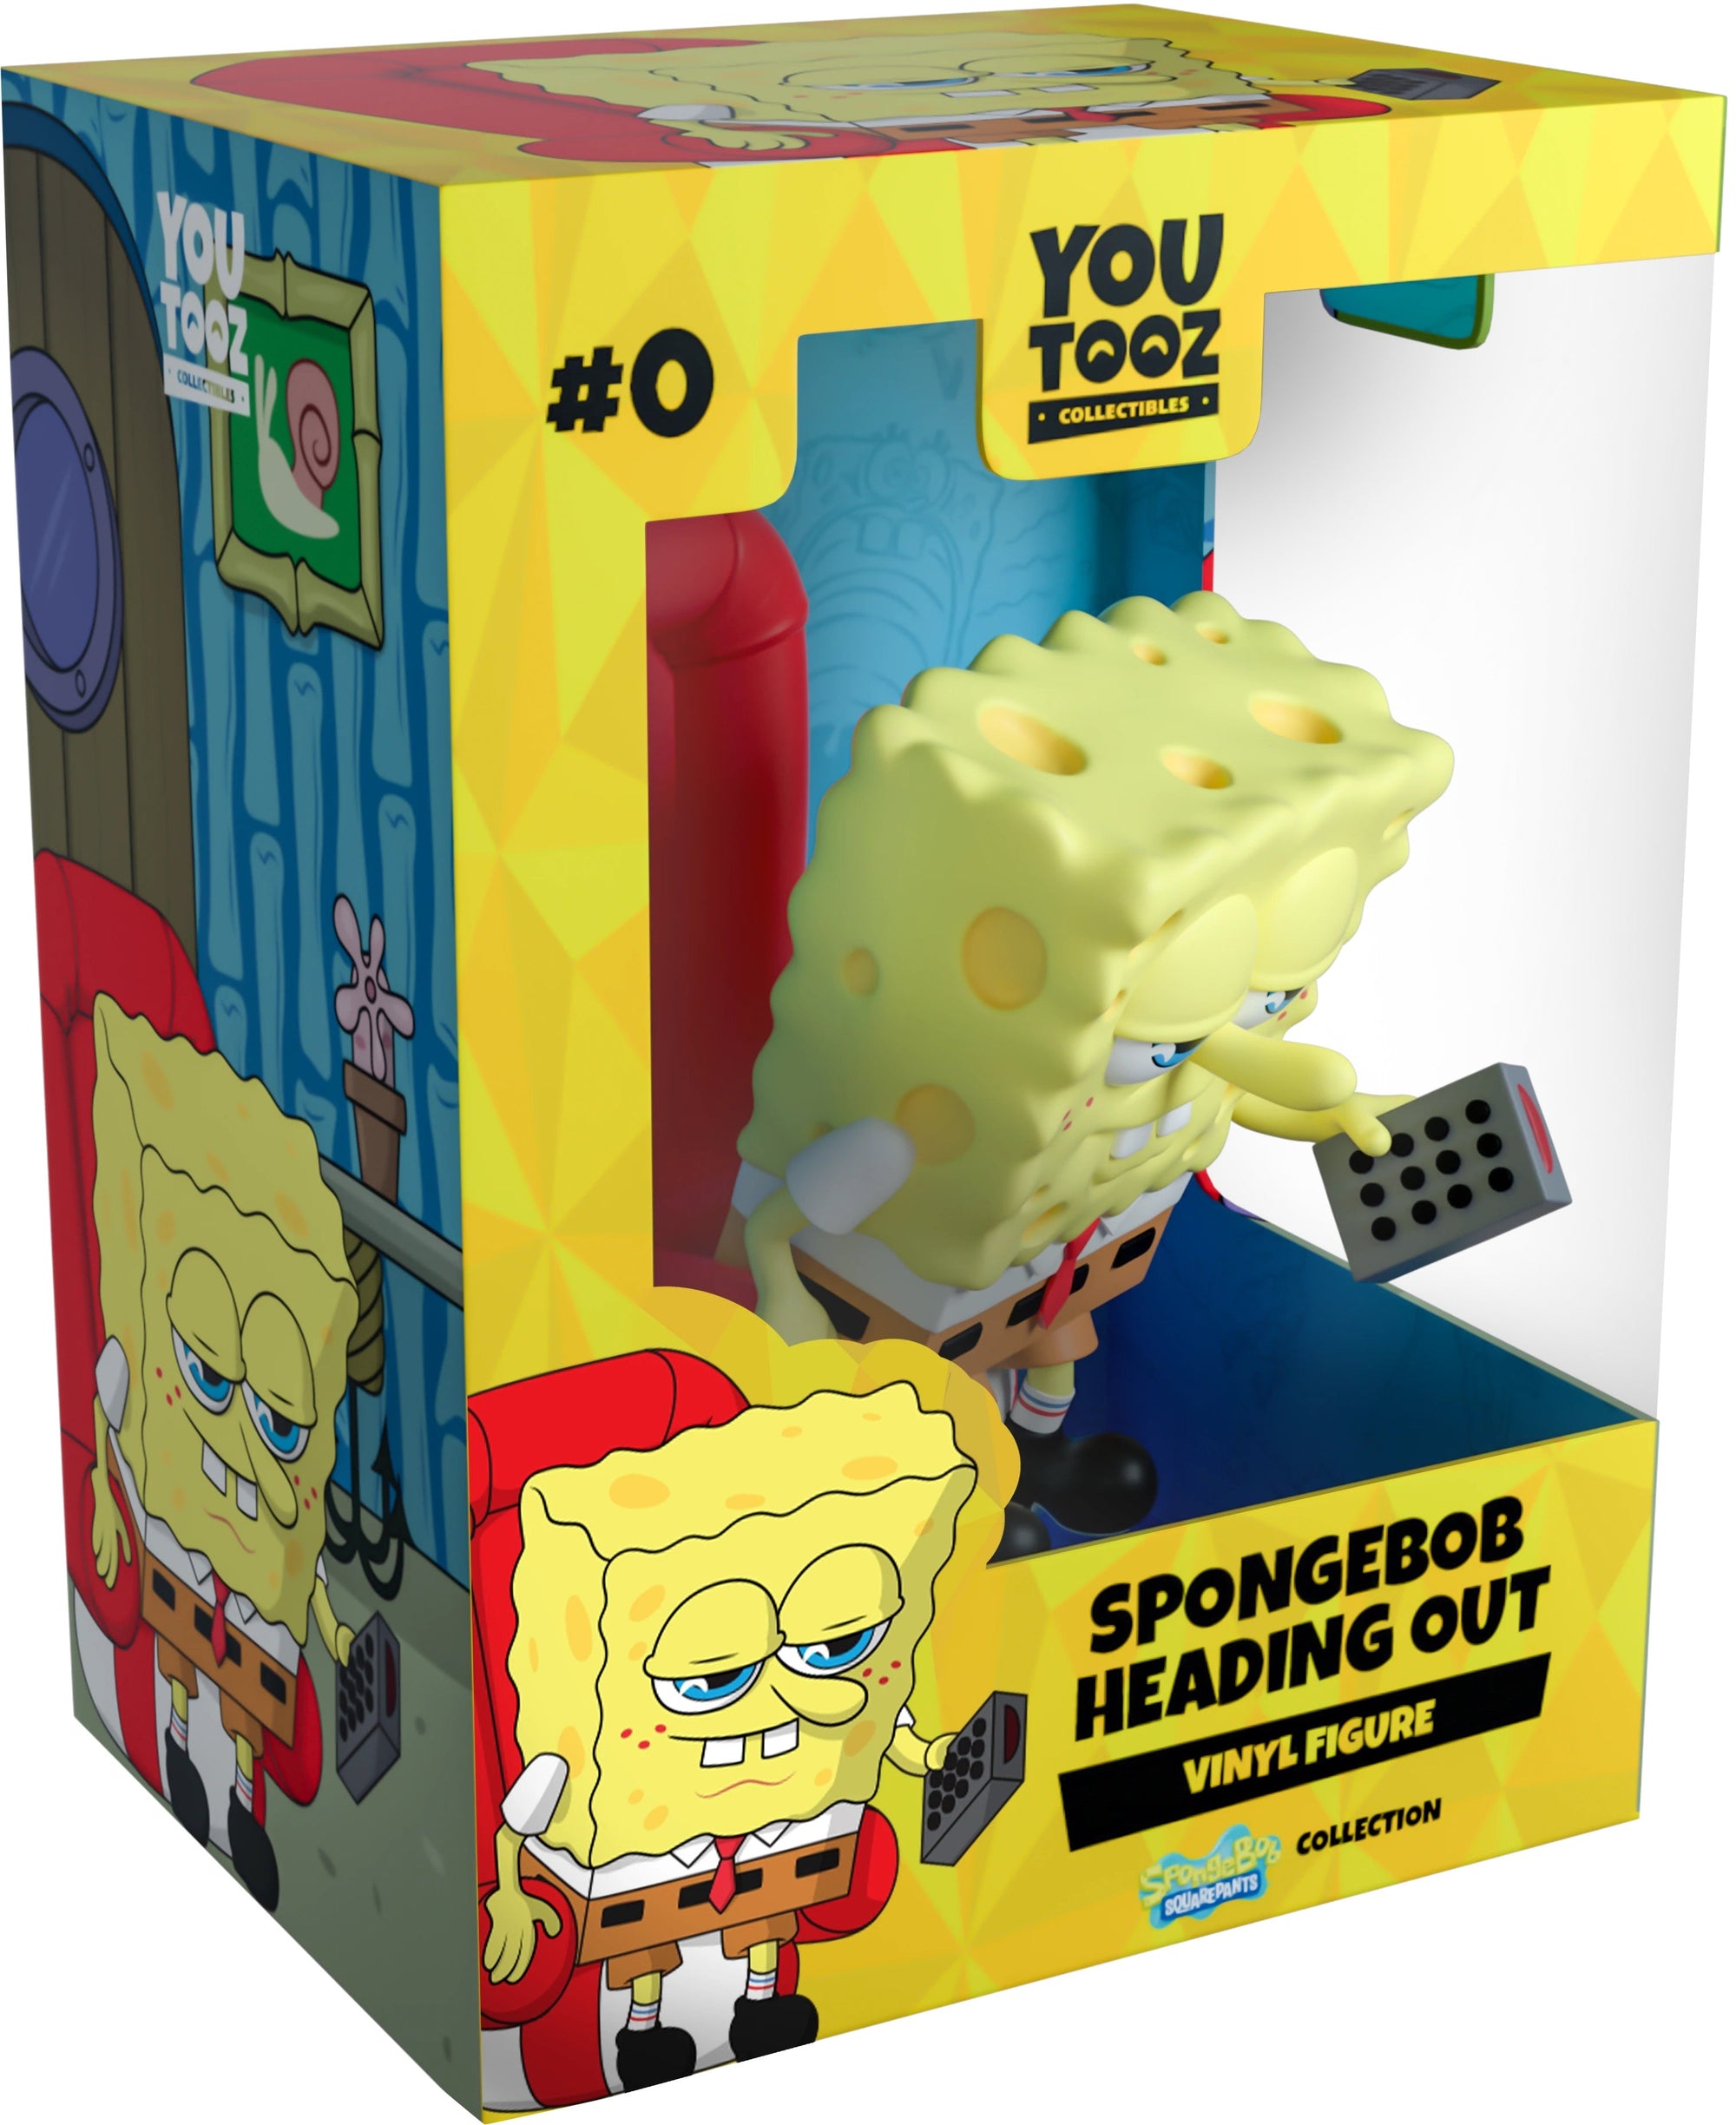 SpongeBob Squarepants: SpongeBob Heading Out Toy Figure by Youtooz Collectibles